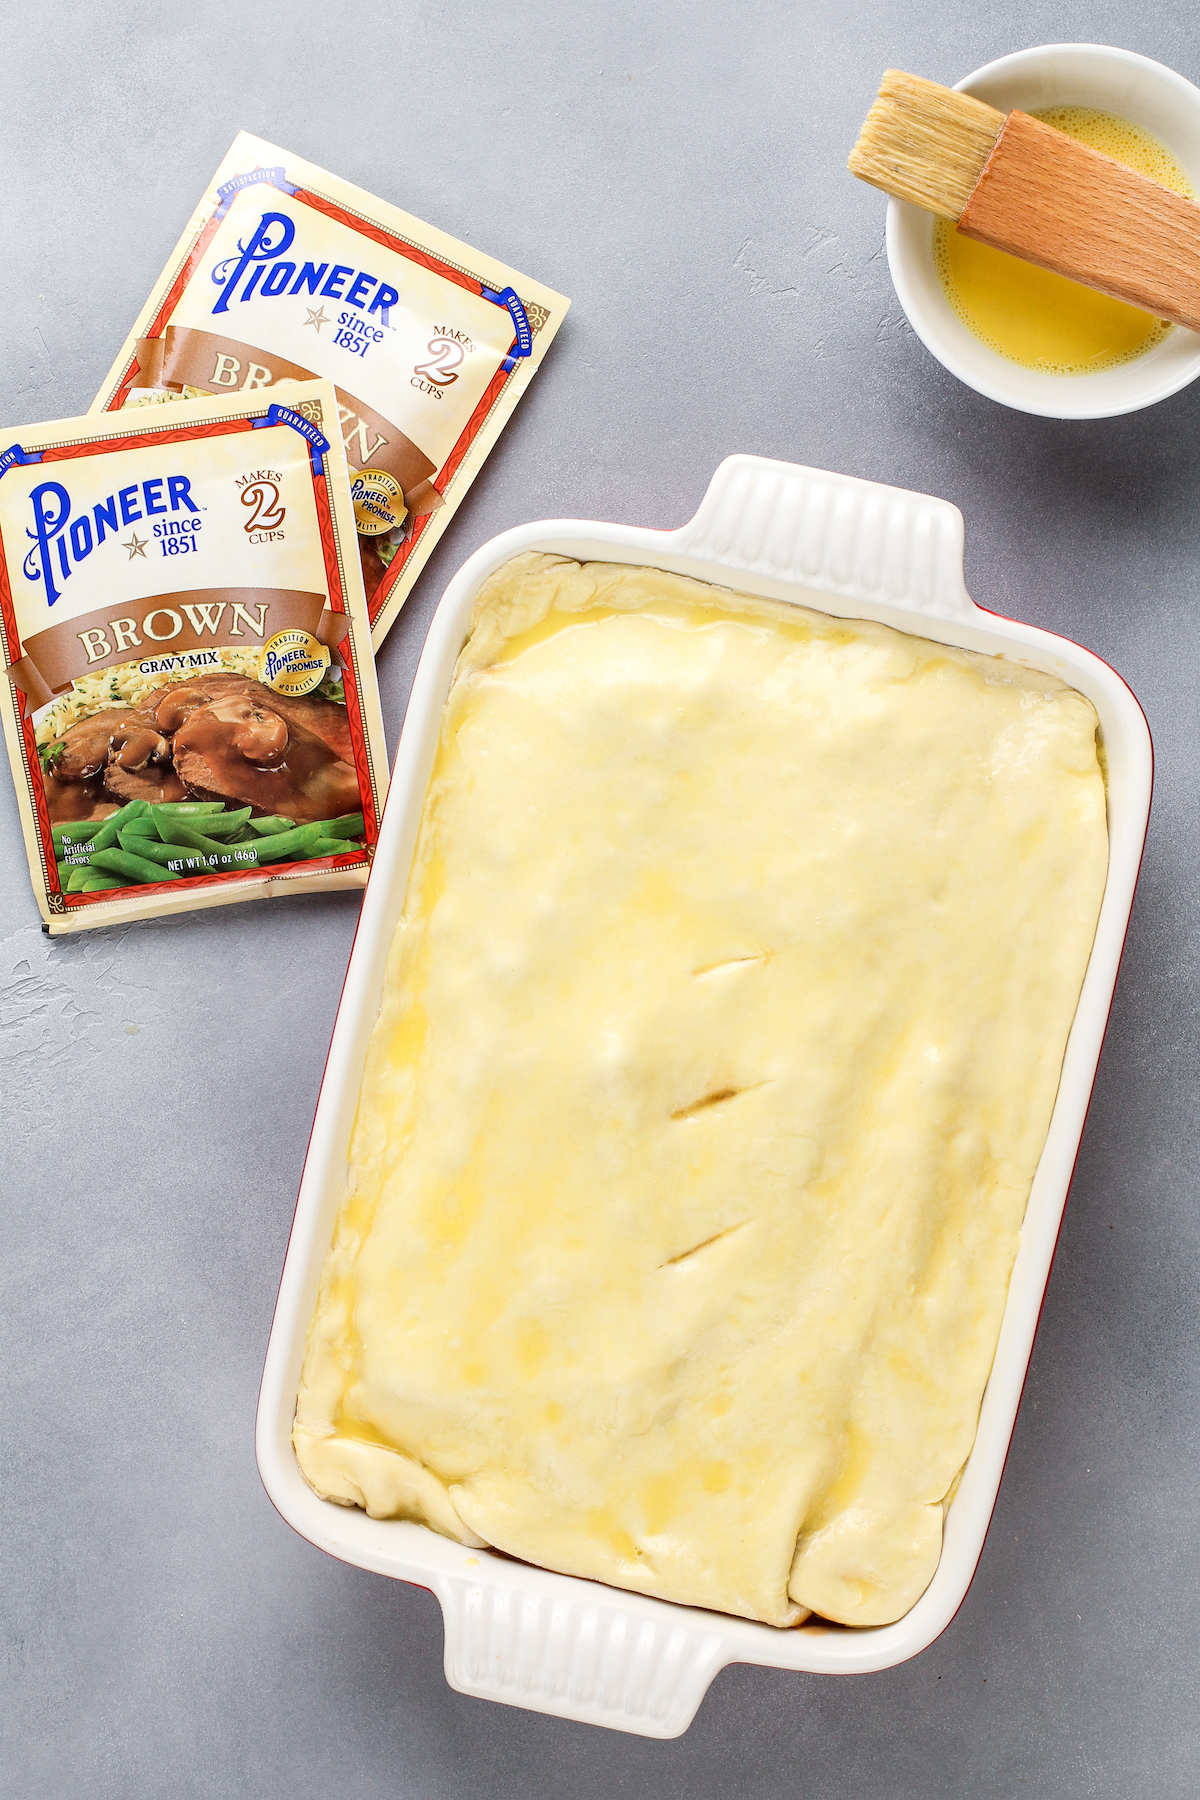 Puff pastry topped casserole brushed with butter and a bowl of butter with a pastry brush.